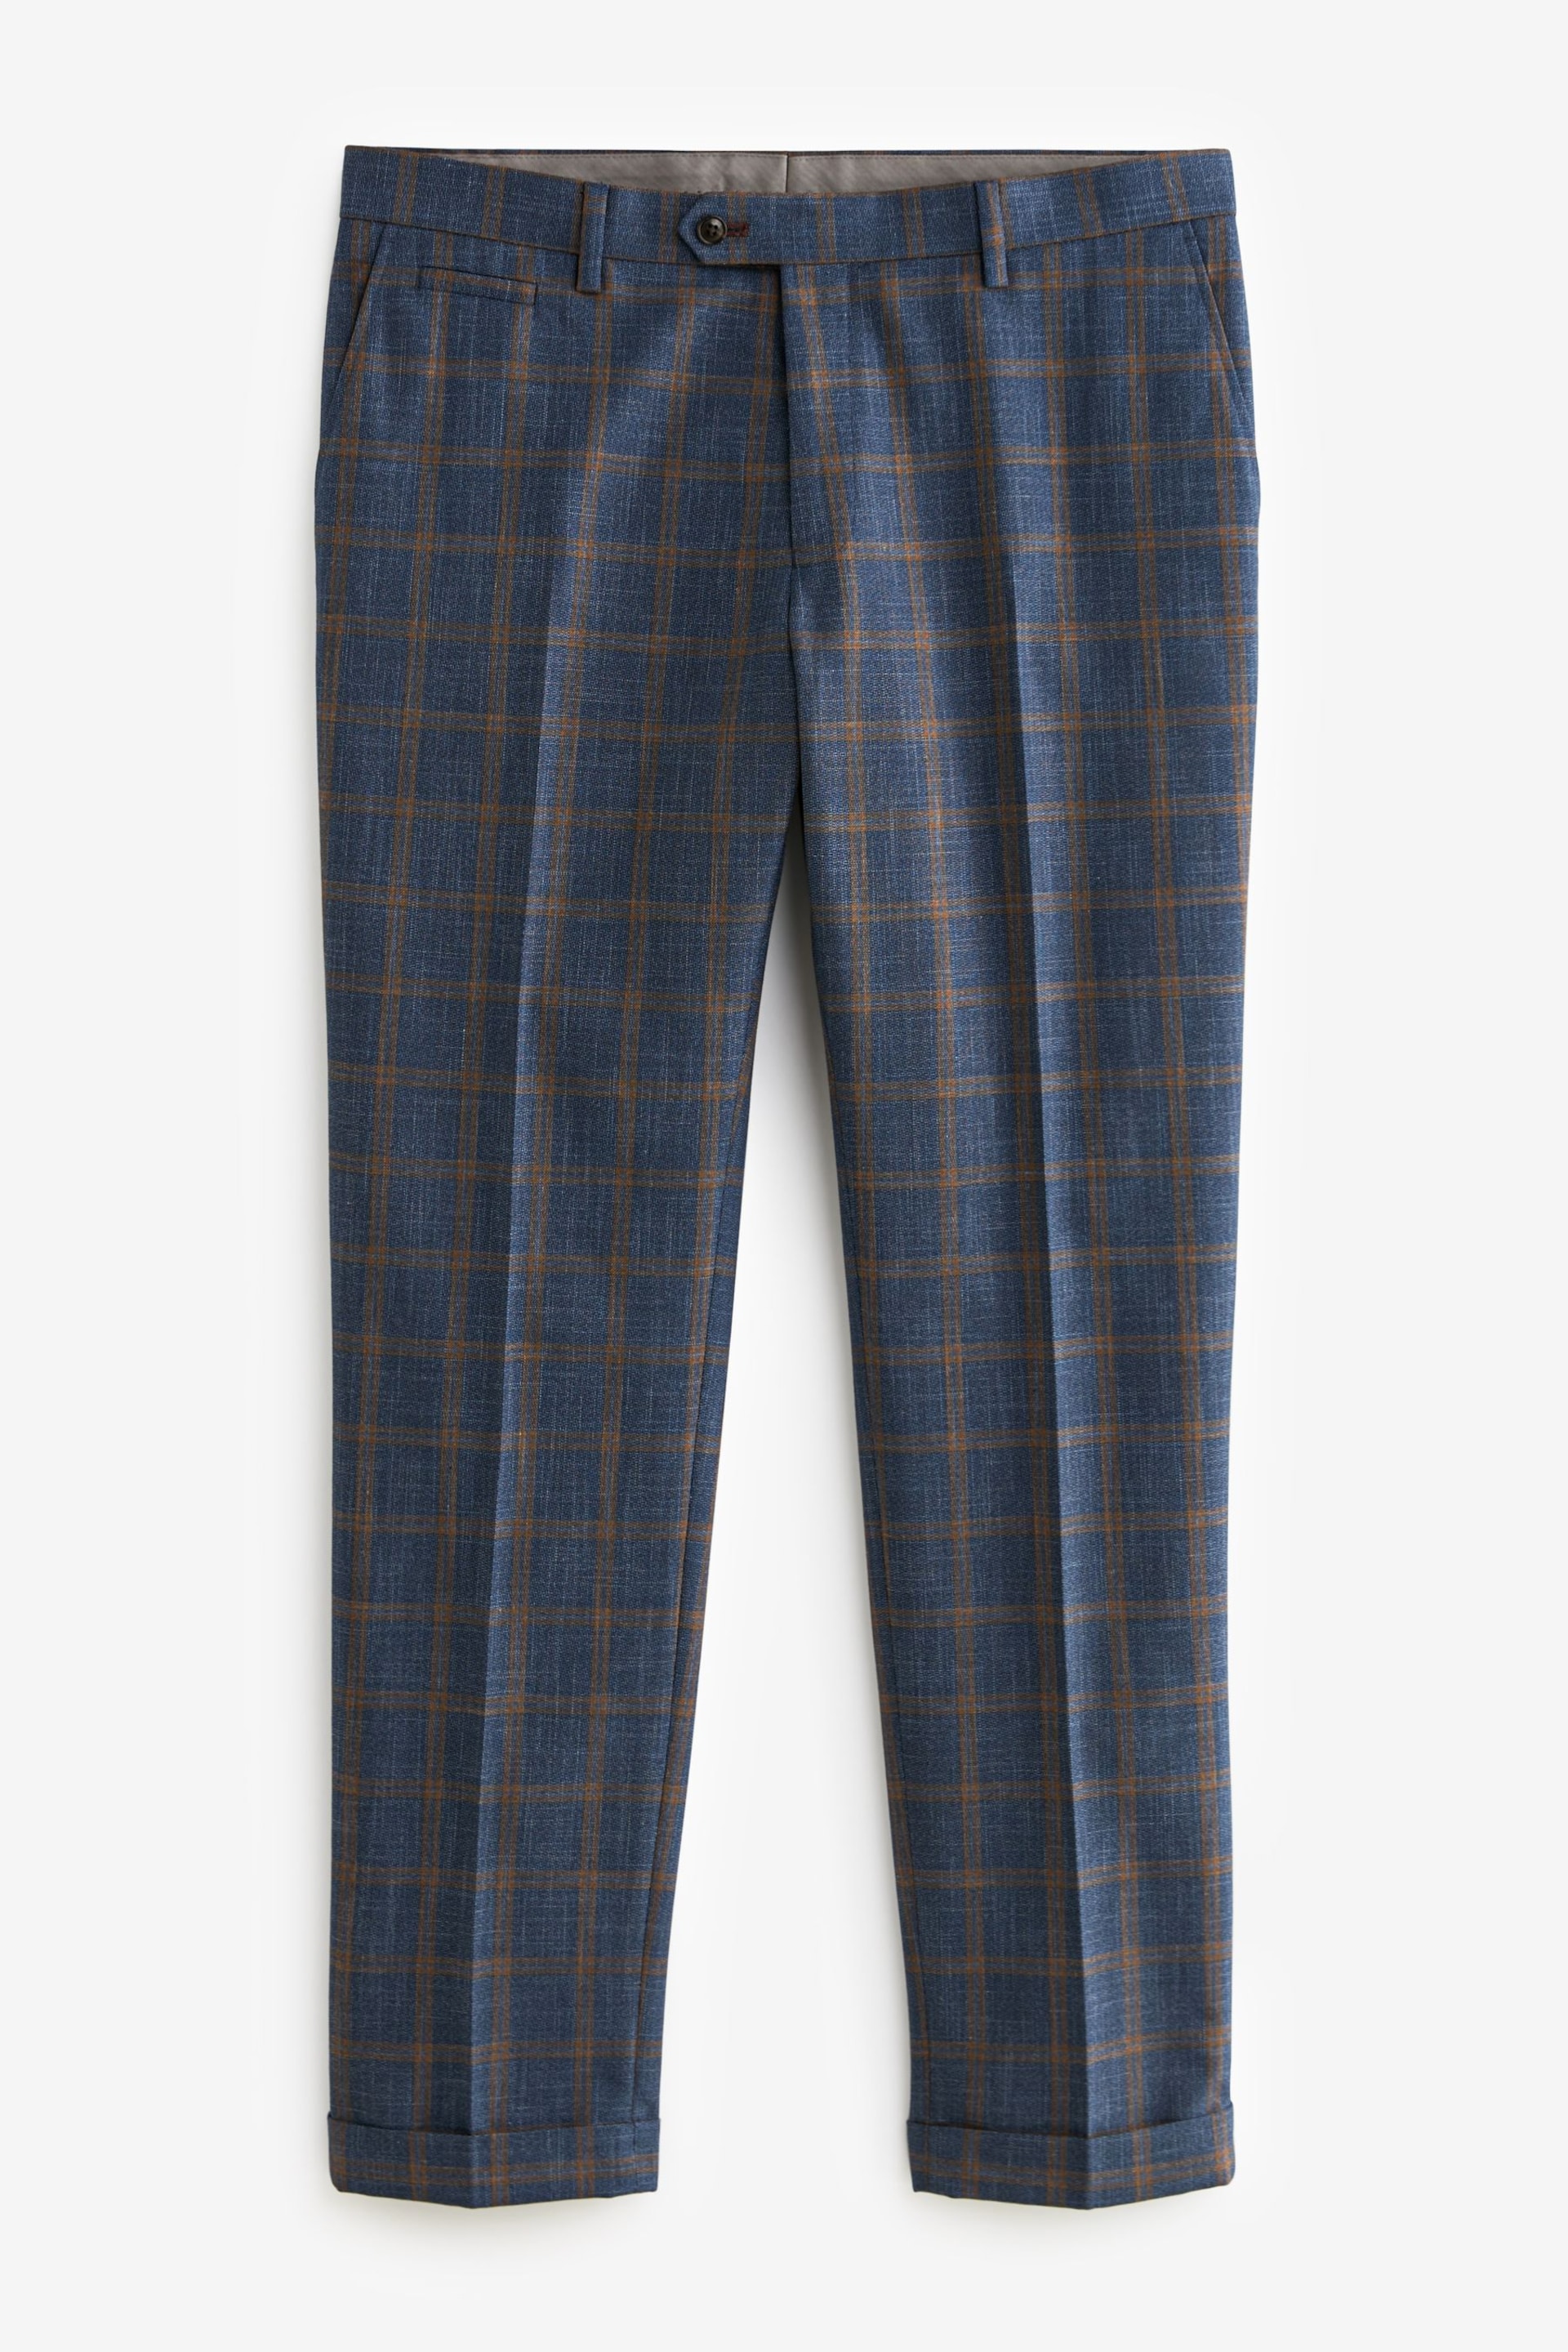 Bright Blue Skinny Fit Trimmed Check Suit Trousers - Image 6 of 9